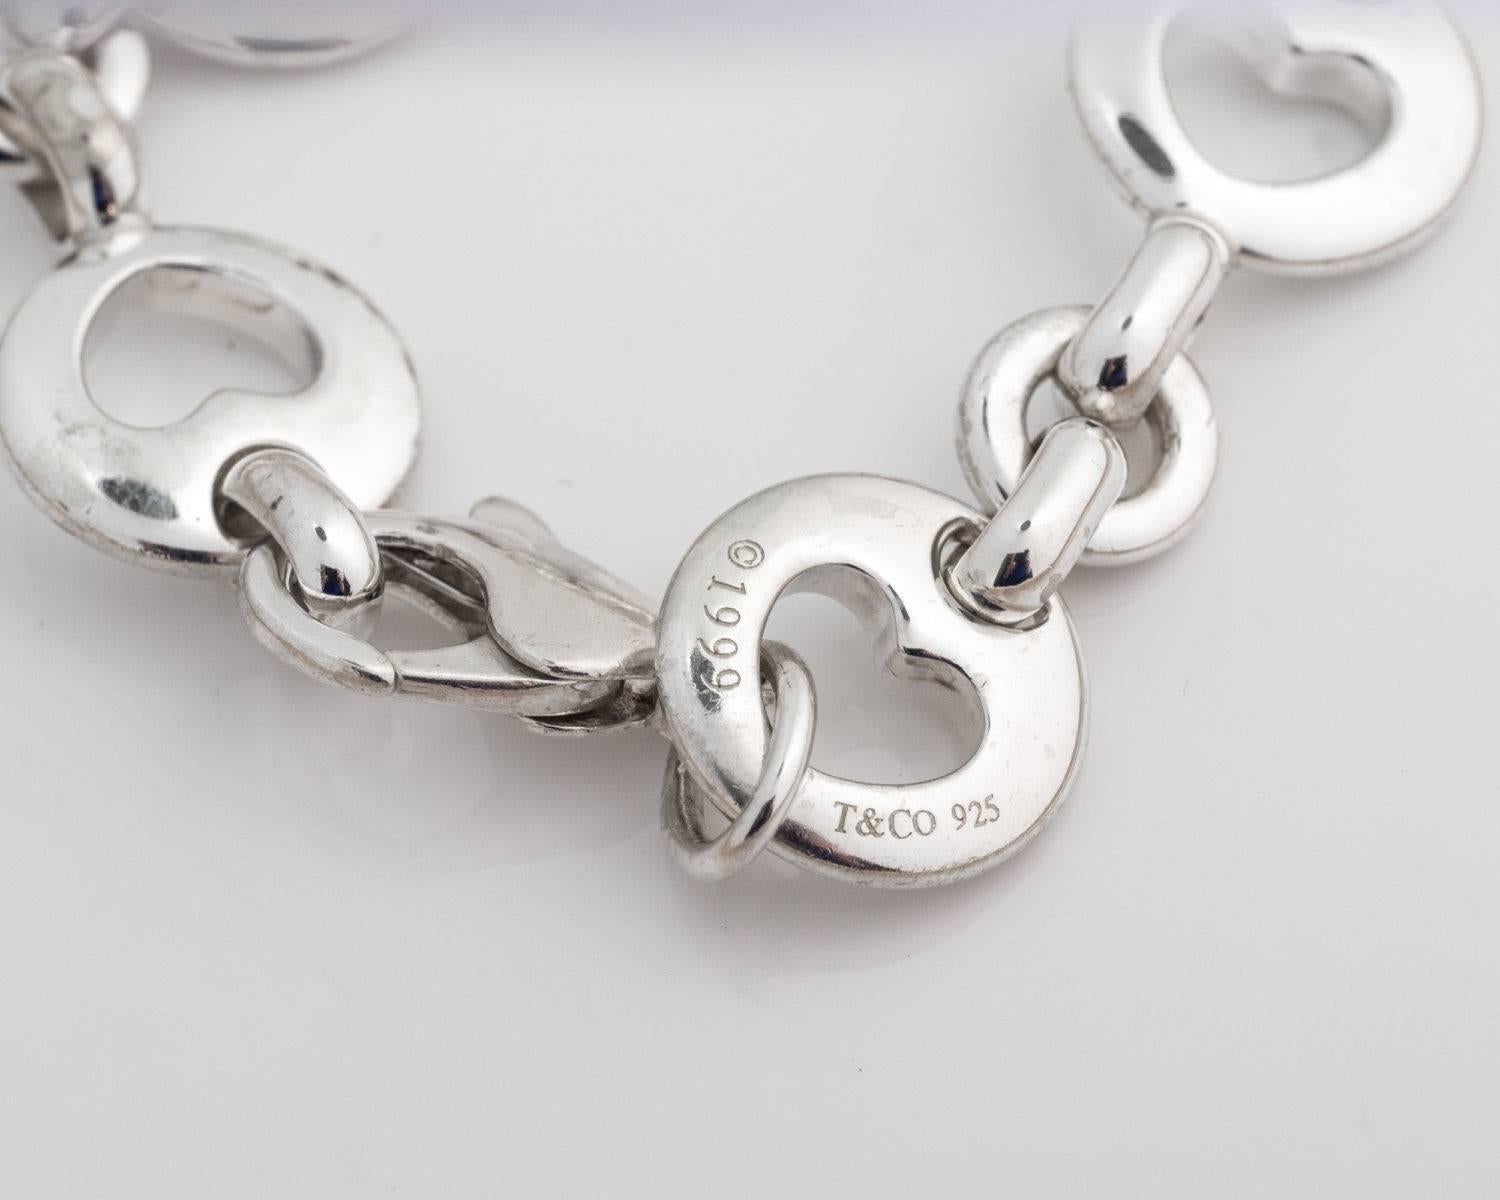 Tiffany and Co. Heart Cutout Link Charm Bracelet - Sterling Silver

In 1999 Tiffany and Co. made this Limited Edition bracelet along with other items for a turn of the century collection. 
Each round link has a heart cutout in the middle. Three